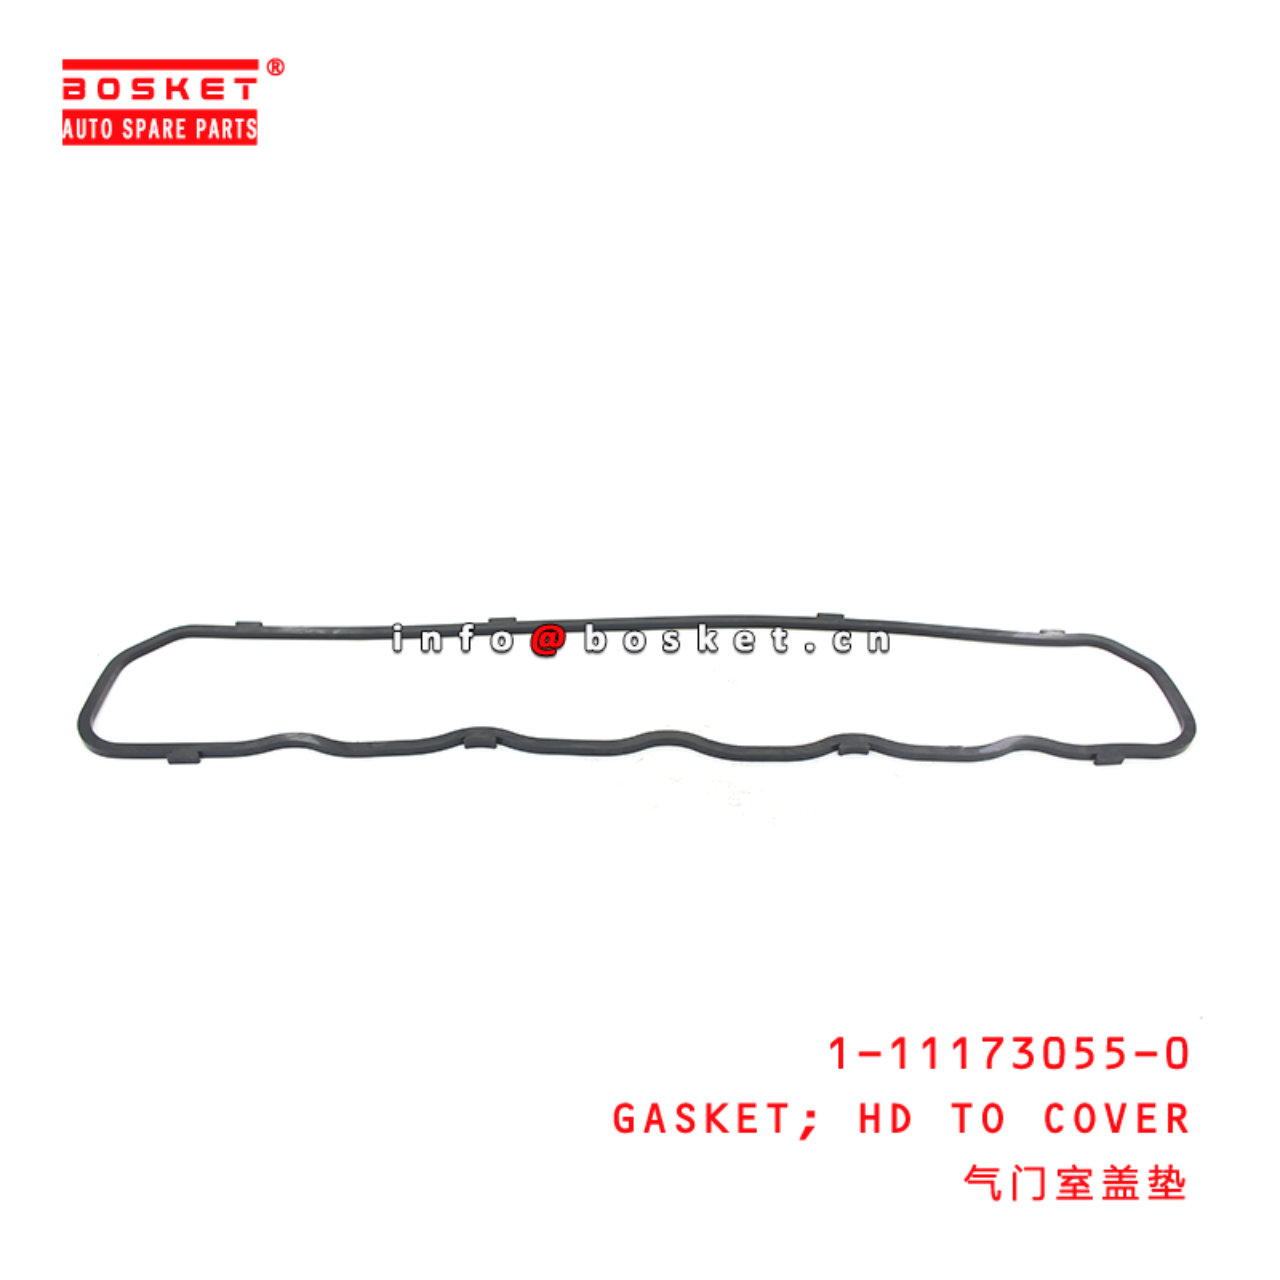 1-11173055-0 Head To Cover Gasket suitable for ISUZU 1111730550